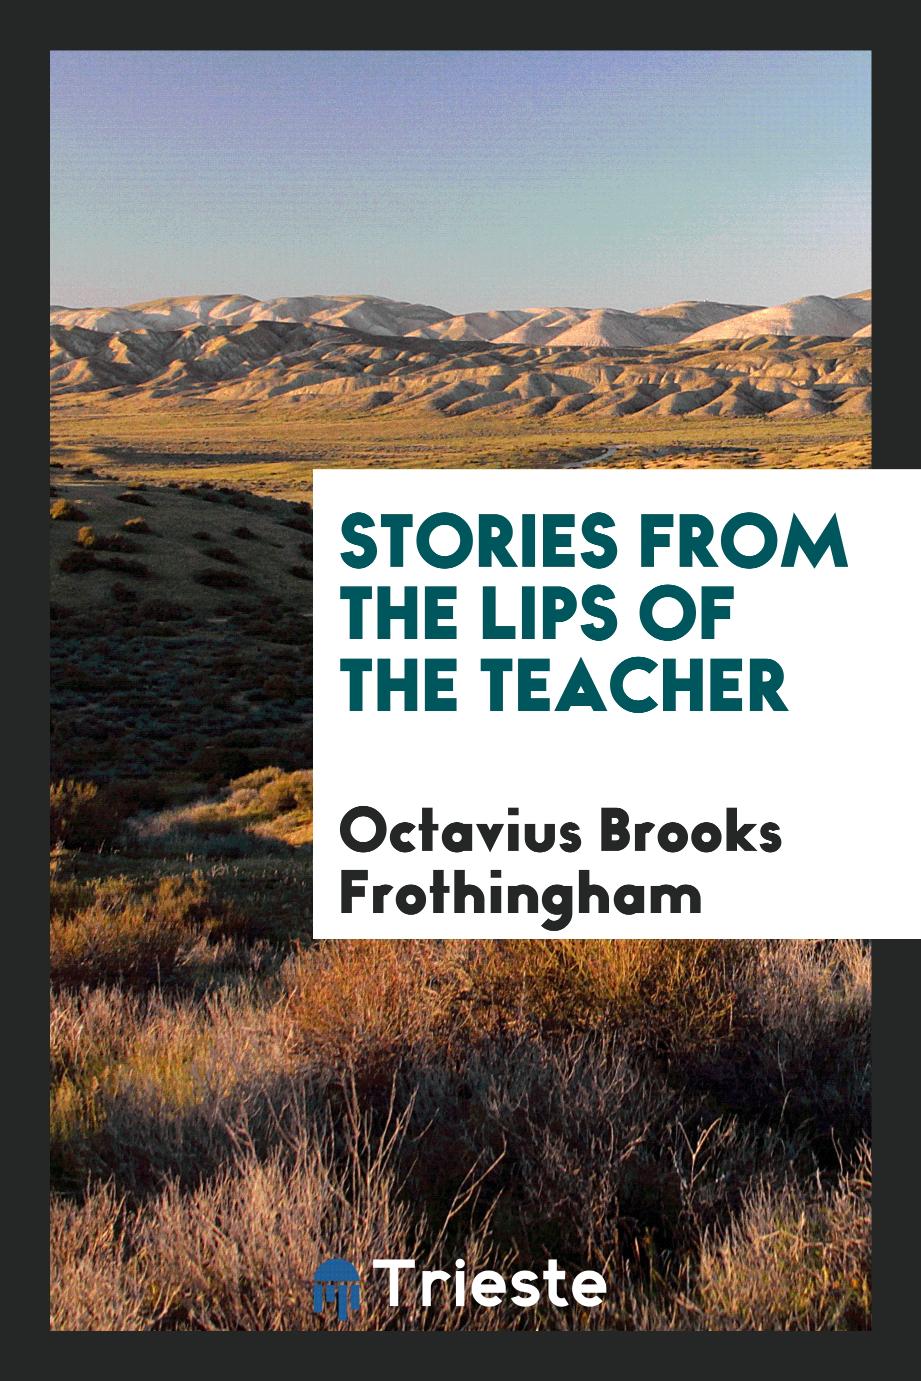 Stories from the Lips of the Teacher